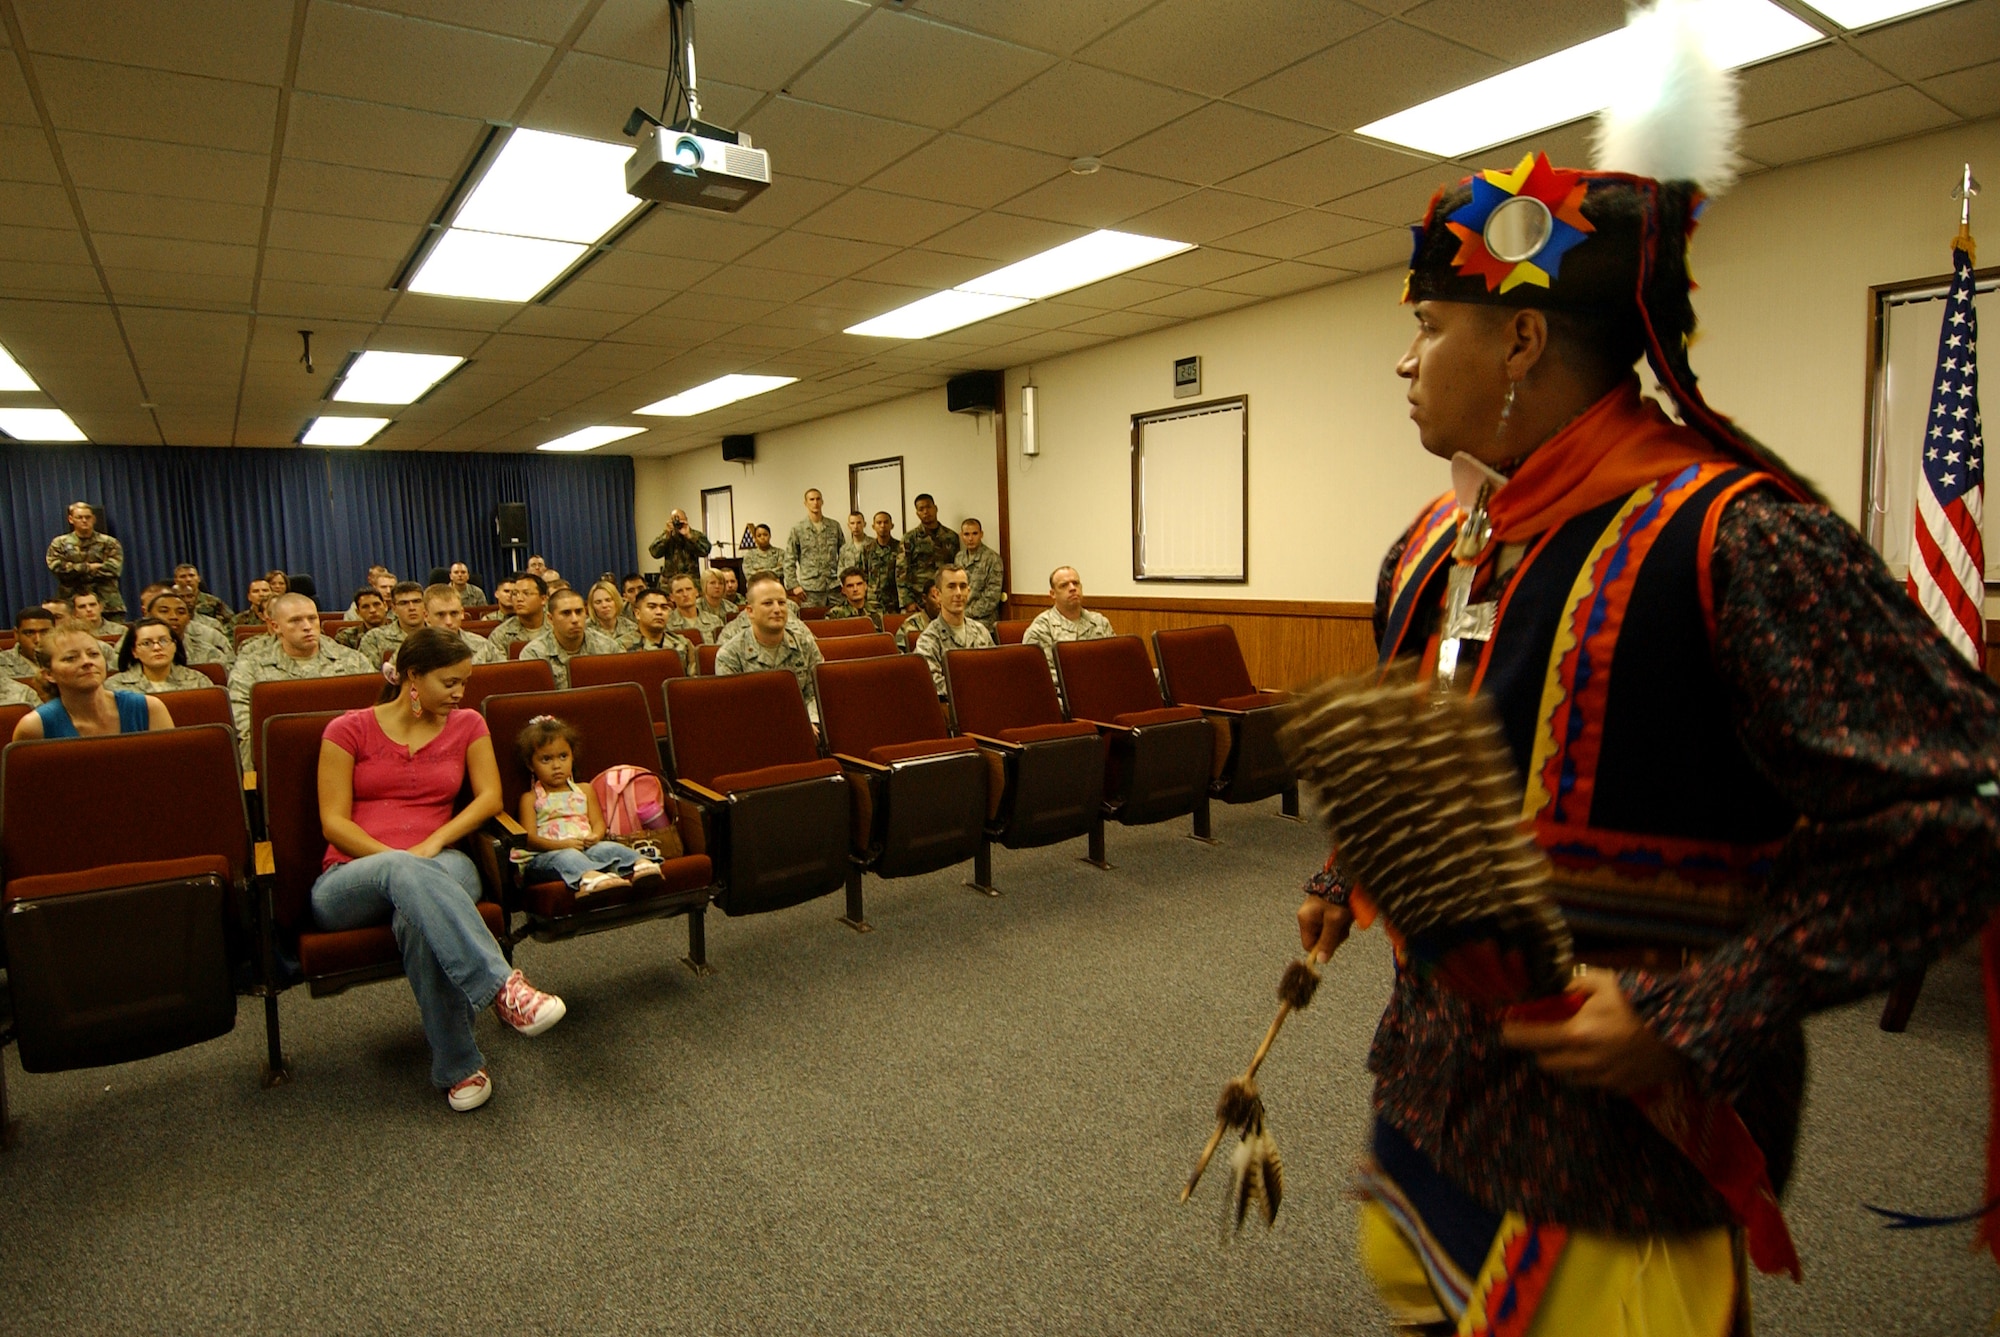 Technical Sgt. Thundercloud Hirajeta performs a traditional dance called the "War Dance" during American Indian and Alaskan Native Heritage month Nov. 14, 2008. The event commemorated the Native American and Alaskan cultures and the important role Native Americans played as code talkers during the WWII battles in the Pacific Region. 
(U.S. Air Force photo/Tech. Sgt. Rey Ramon)                                                        